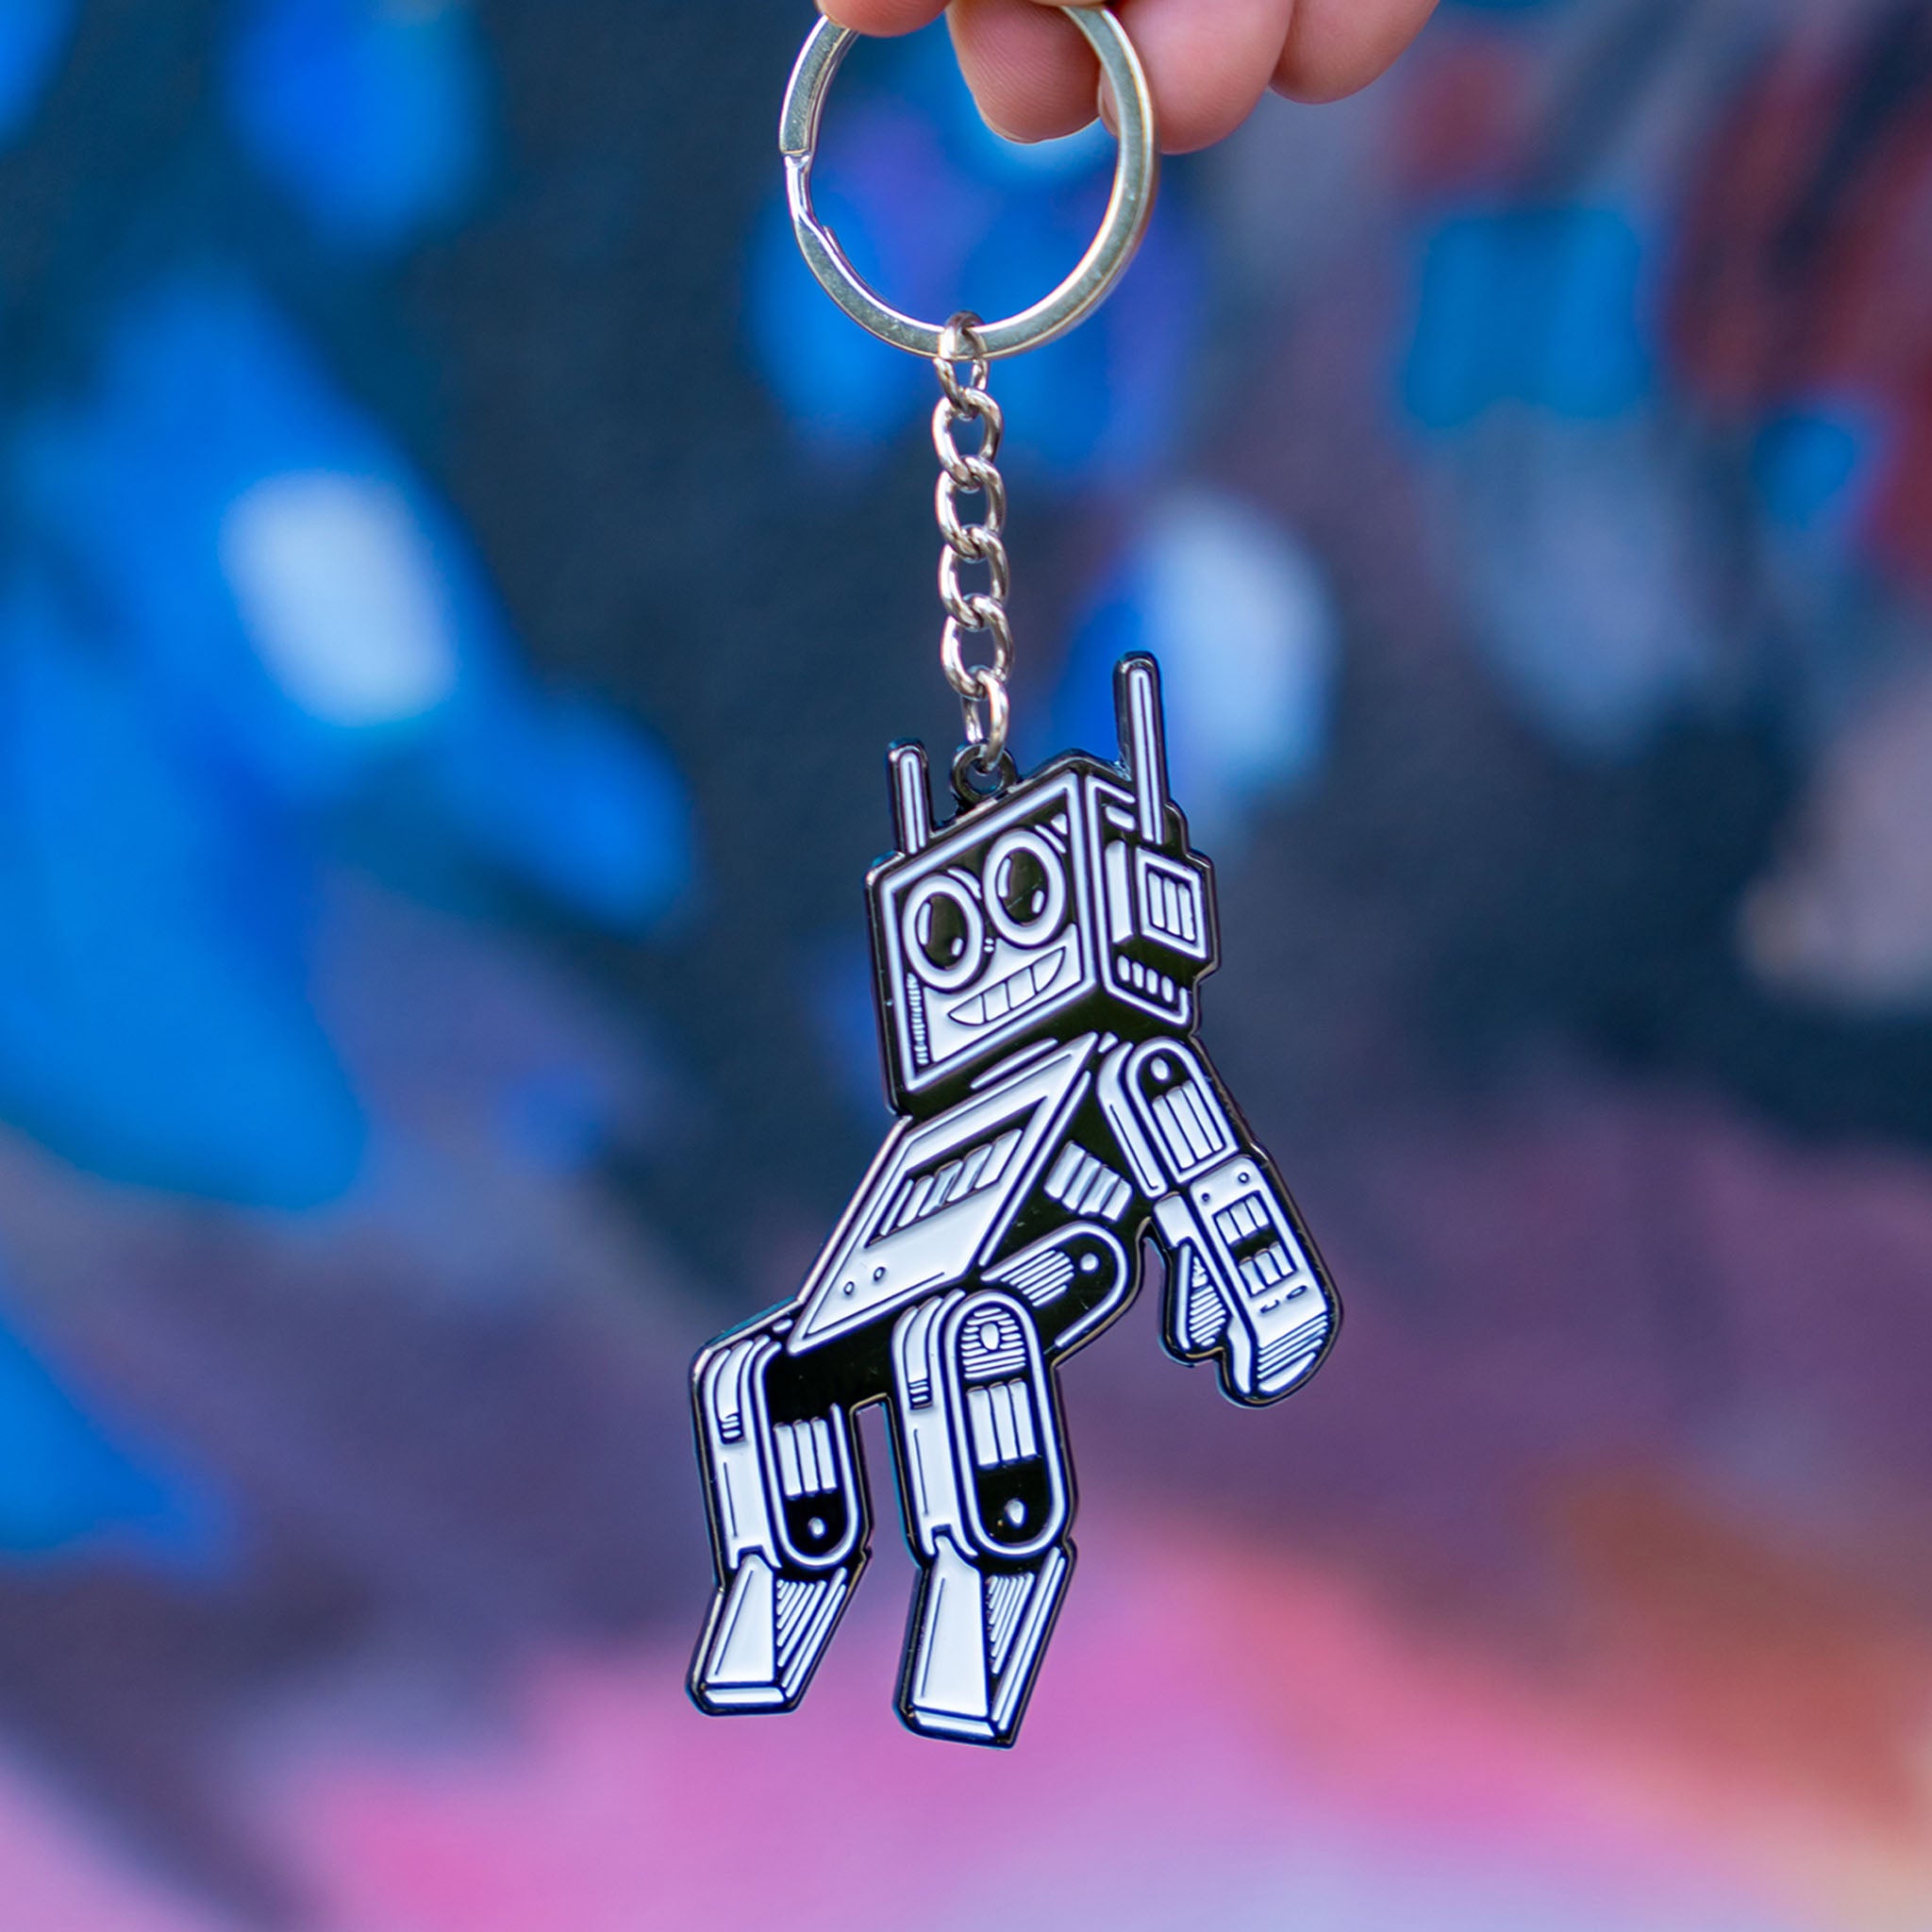 The London Police ROBOT Keychain